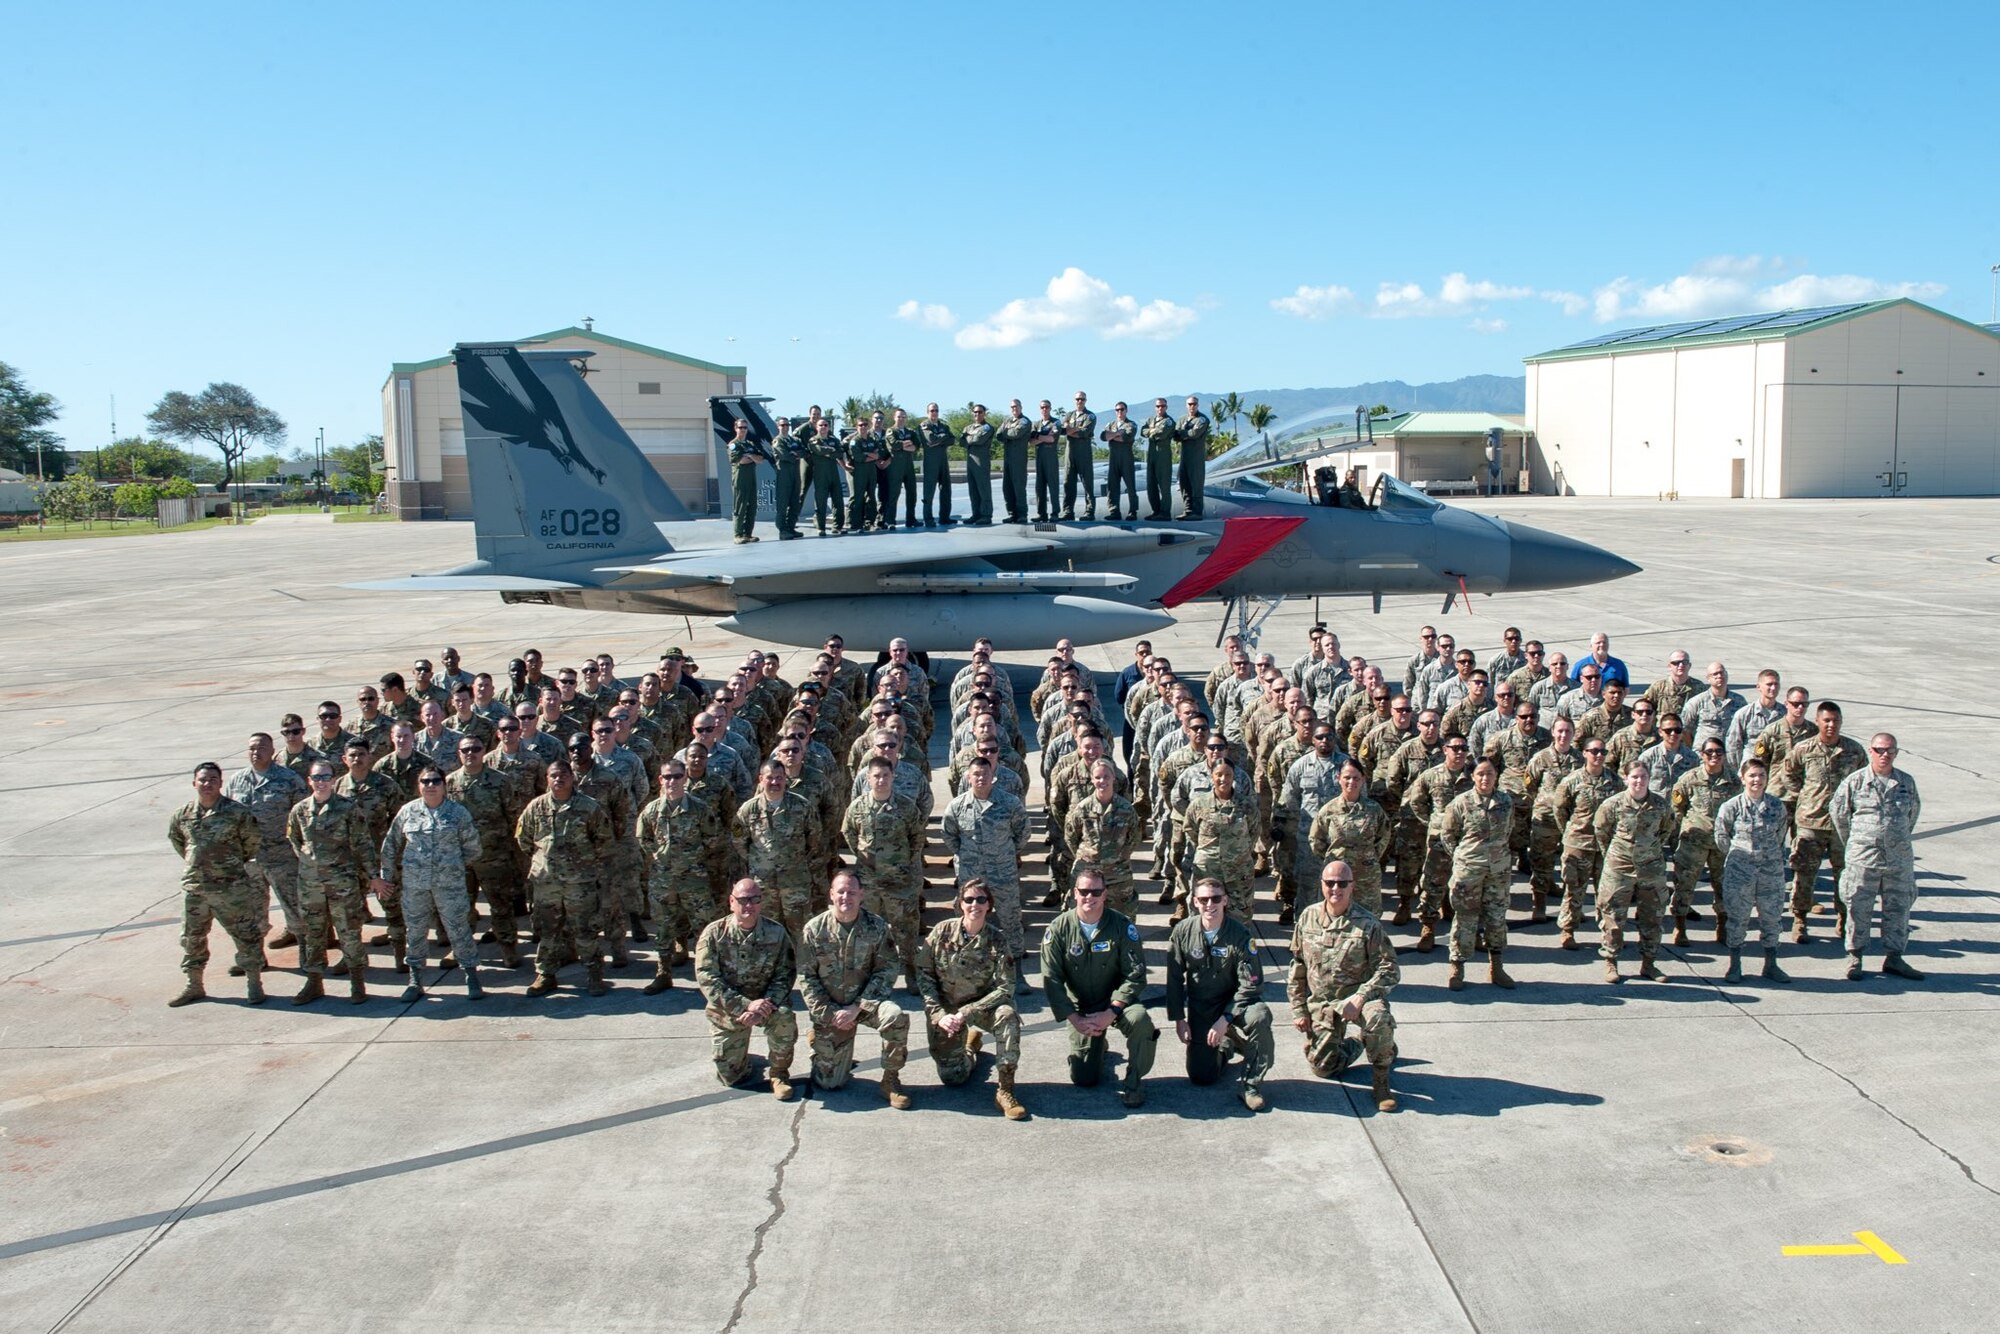 During the final day of Sentry Aloha 20-1, which is a fighter integration training exercise held at Joint Base Pearl Harbor-Hickam, Hawaii, 120 Airmen from the 144th Fighter Wing stand in formation for a group photo with an F-15C Eagle.